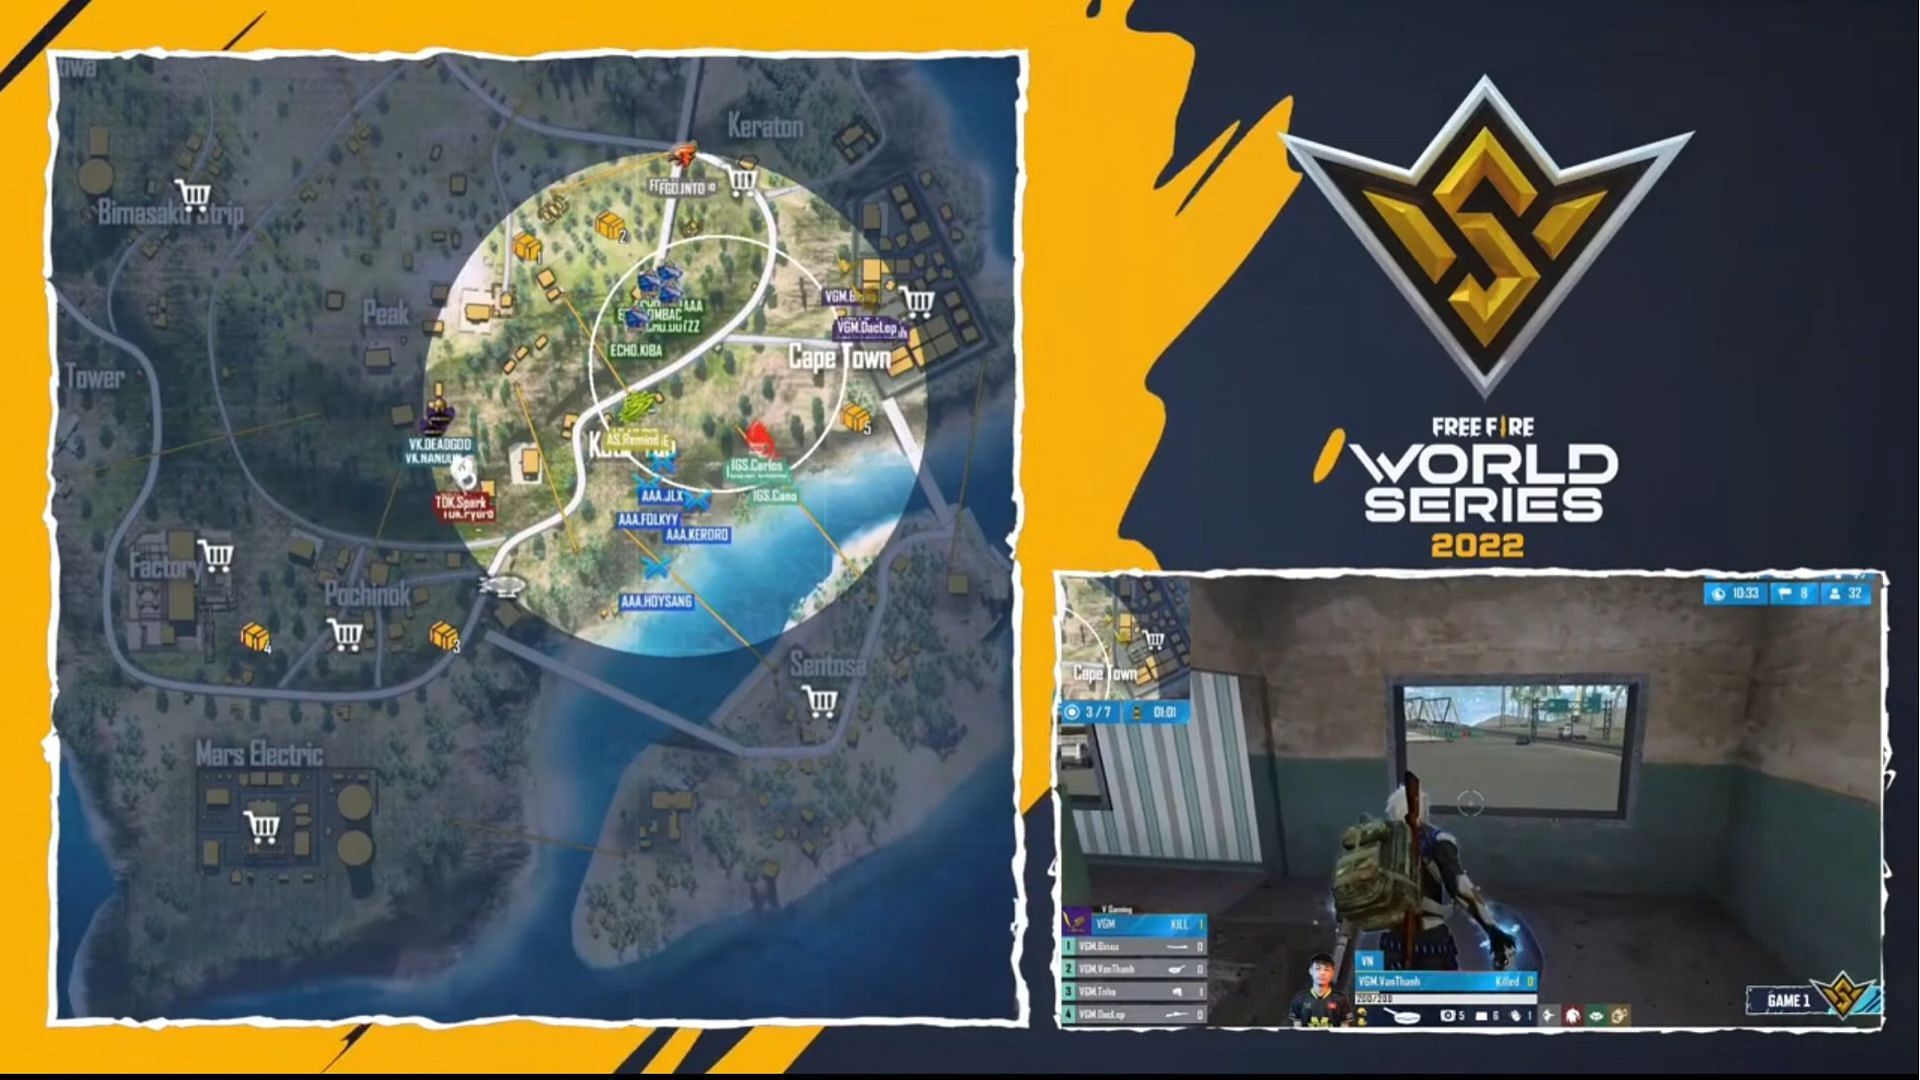 Free Fire World Series 2022 Play-Ins have come to a close (Image via Garena)